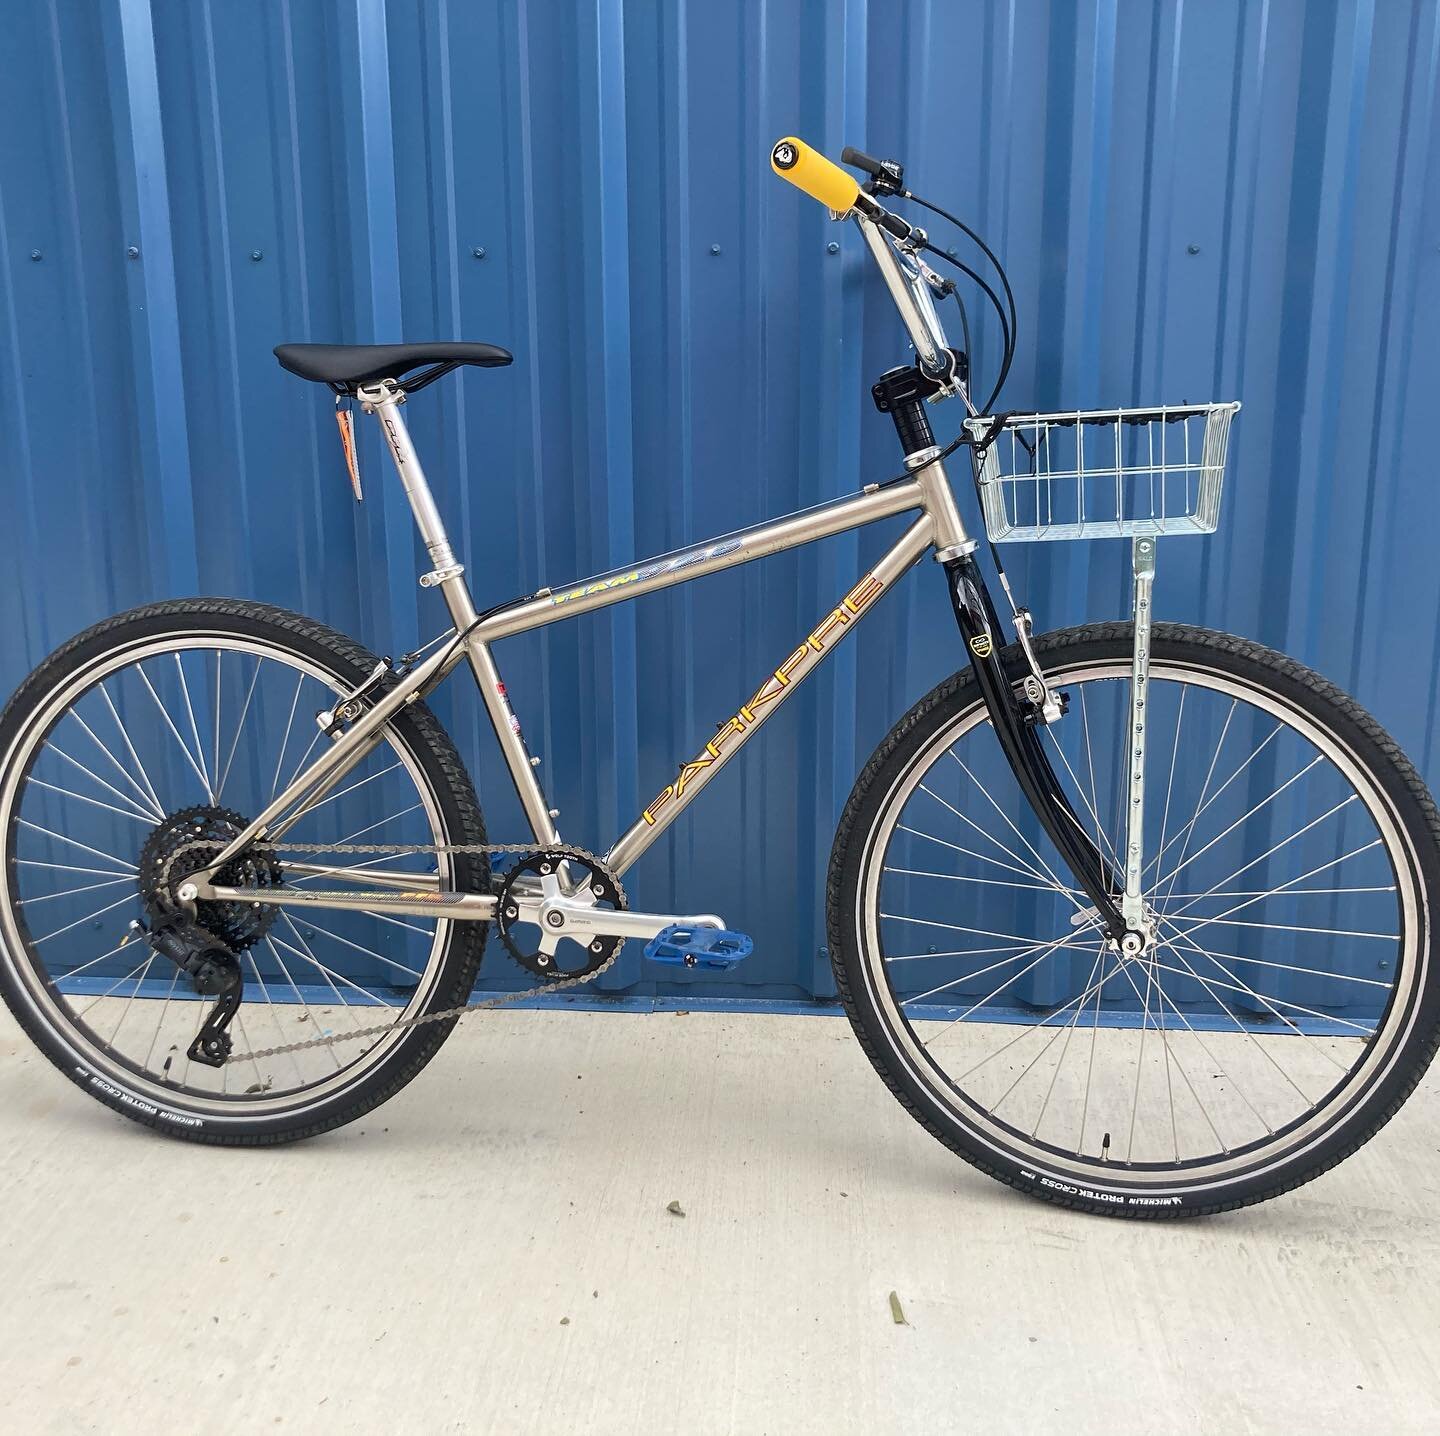 Just off the stand is the Parkpre River Rocket for @camponawanna. It&rsquo;s fast and comfy with room for a towel. Coming soon to a swimming hole near you. Thanks for the fun project!

#microshift #parkpre #twentysixthclub #steelisreal #retrobike #26